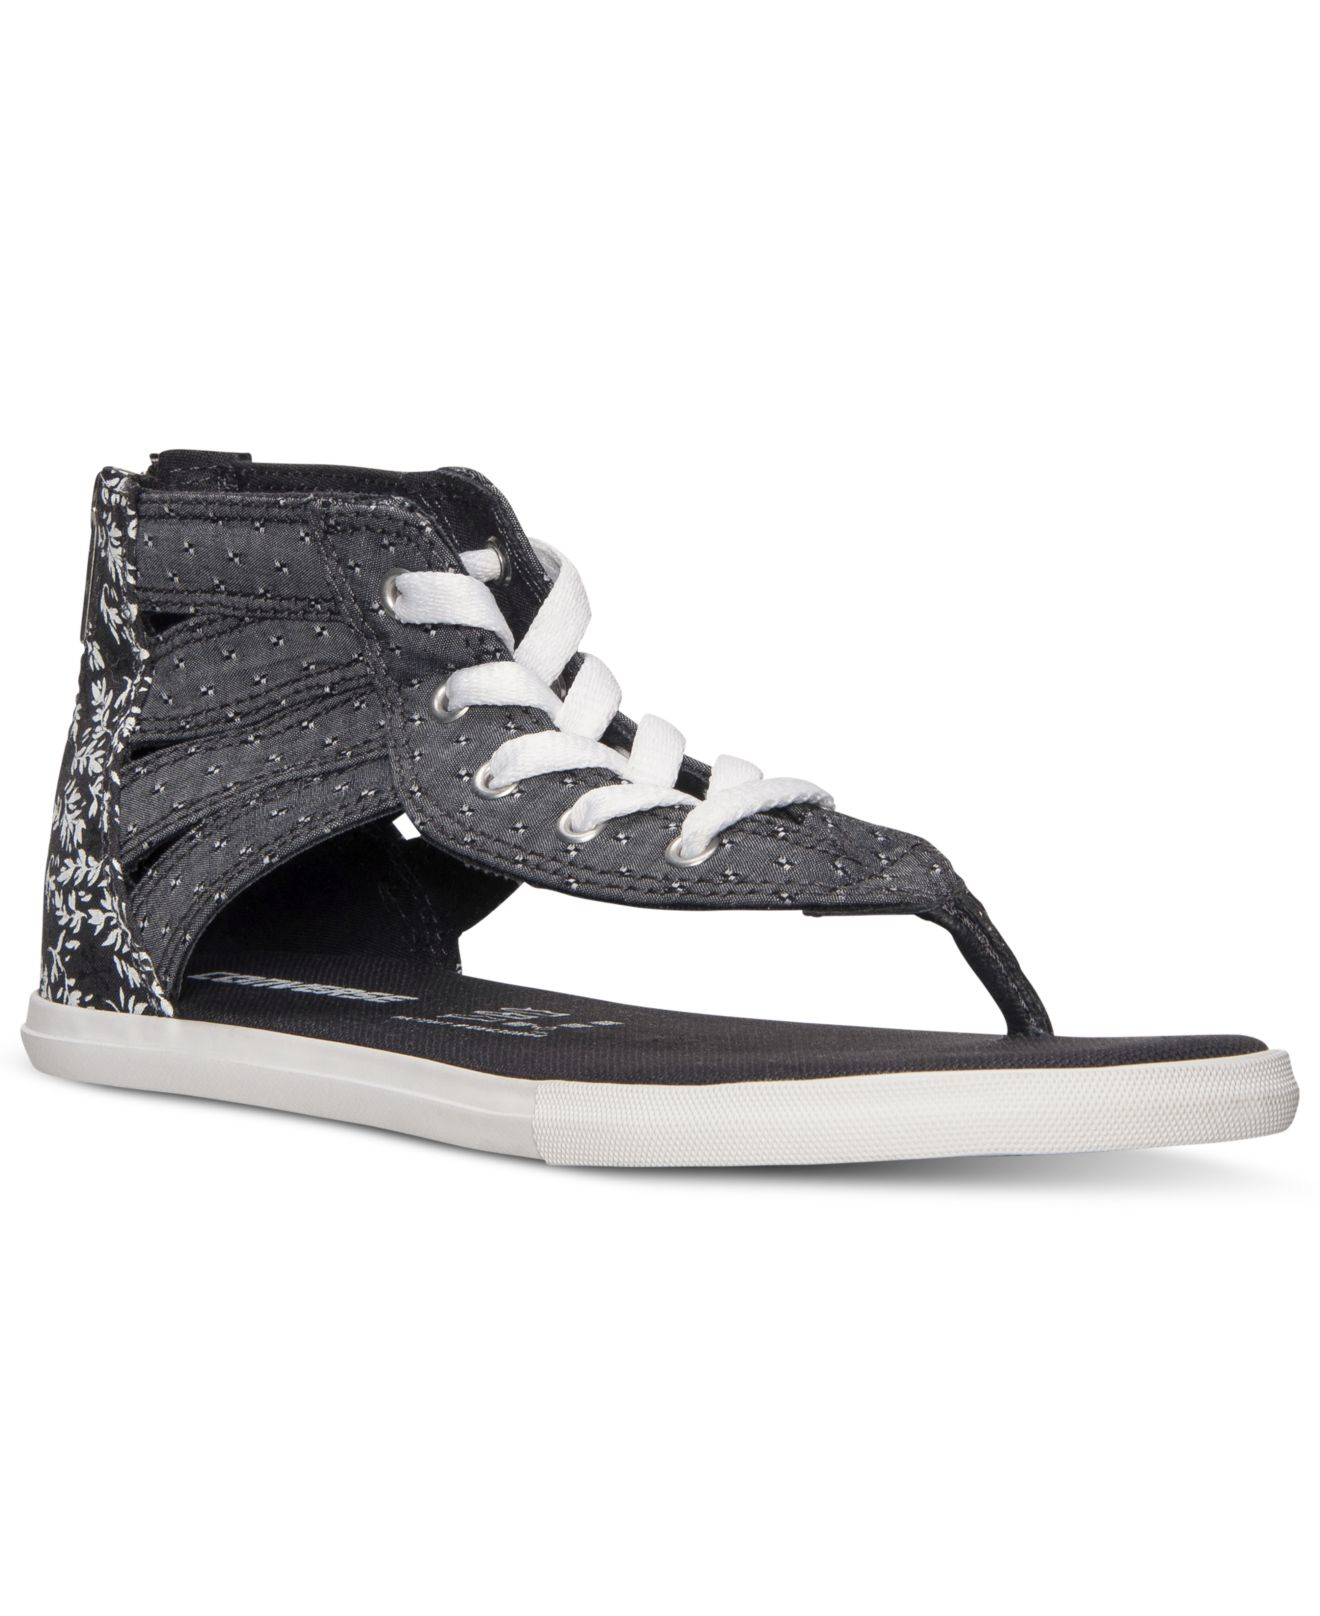 Converse Chuck Taylor Gladiator Thong Sandals From Finish Black | Lyst